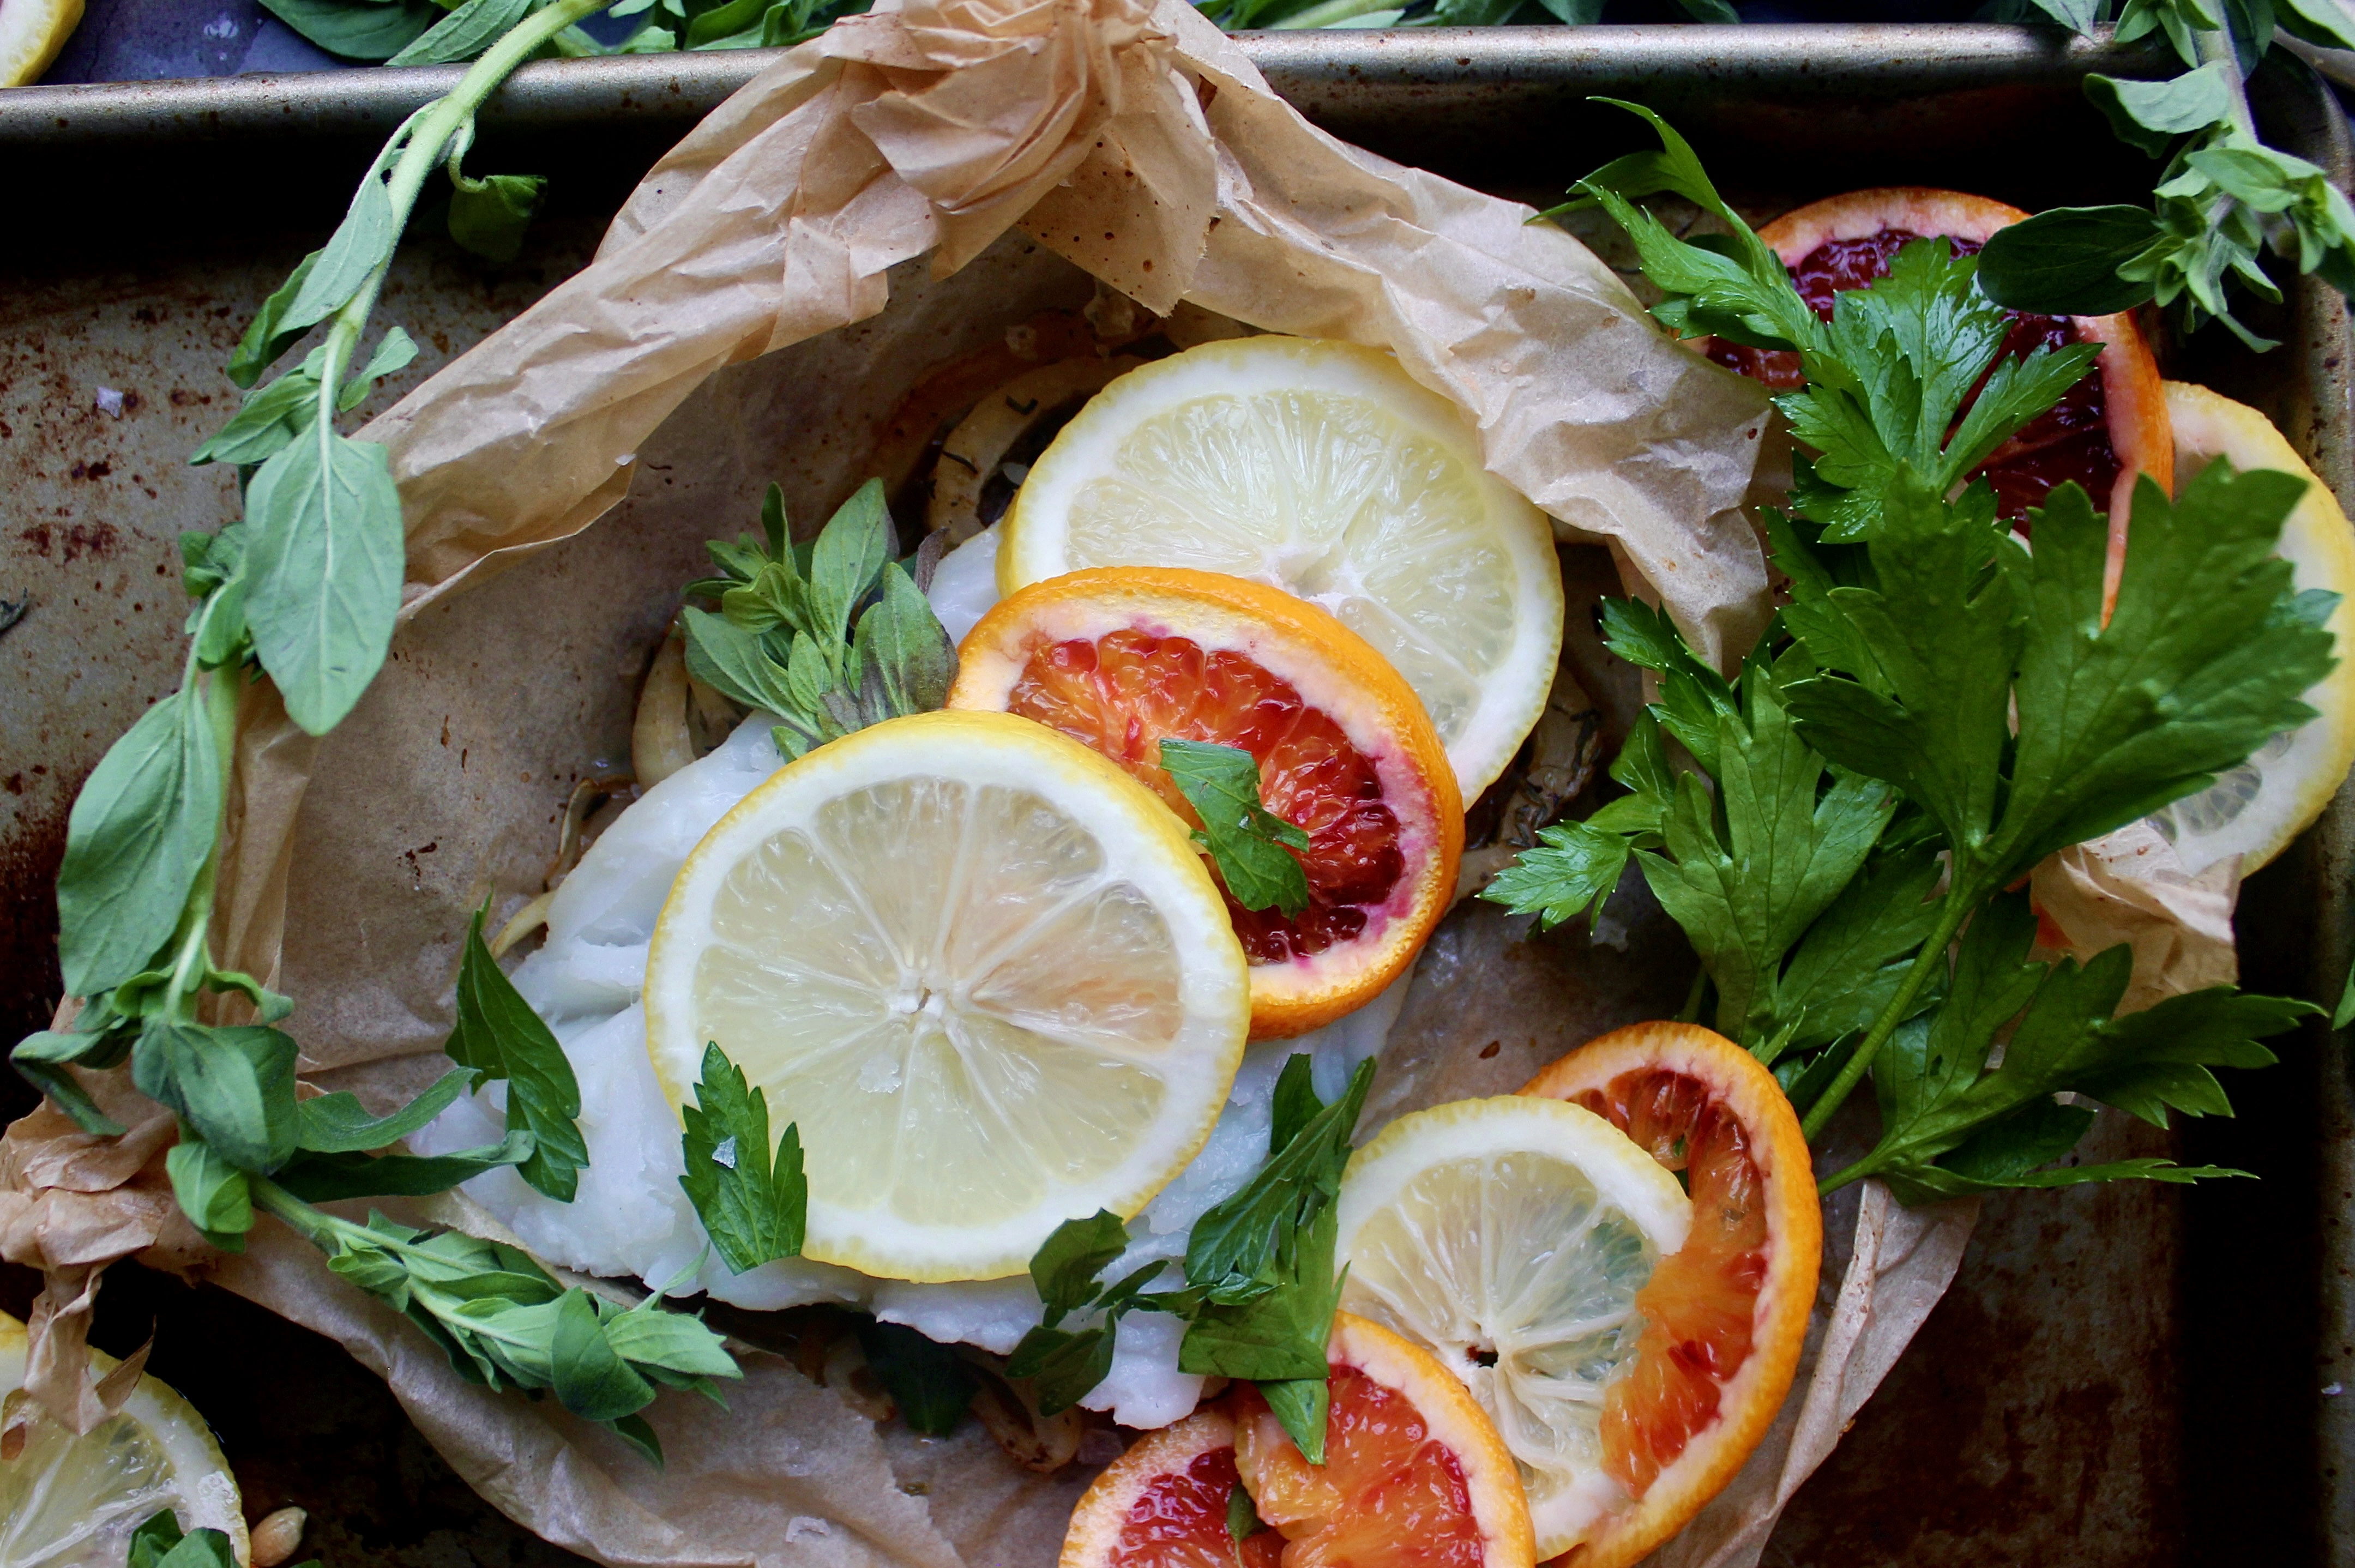 White wine caramelized fennel and shallots under a flaky white fish with layers of blood orange and lemon all tucked into a folded parchment square: this Citrus Fennel Baked Fish en Papillote is truly a package of flavor!